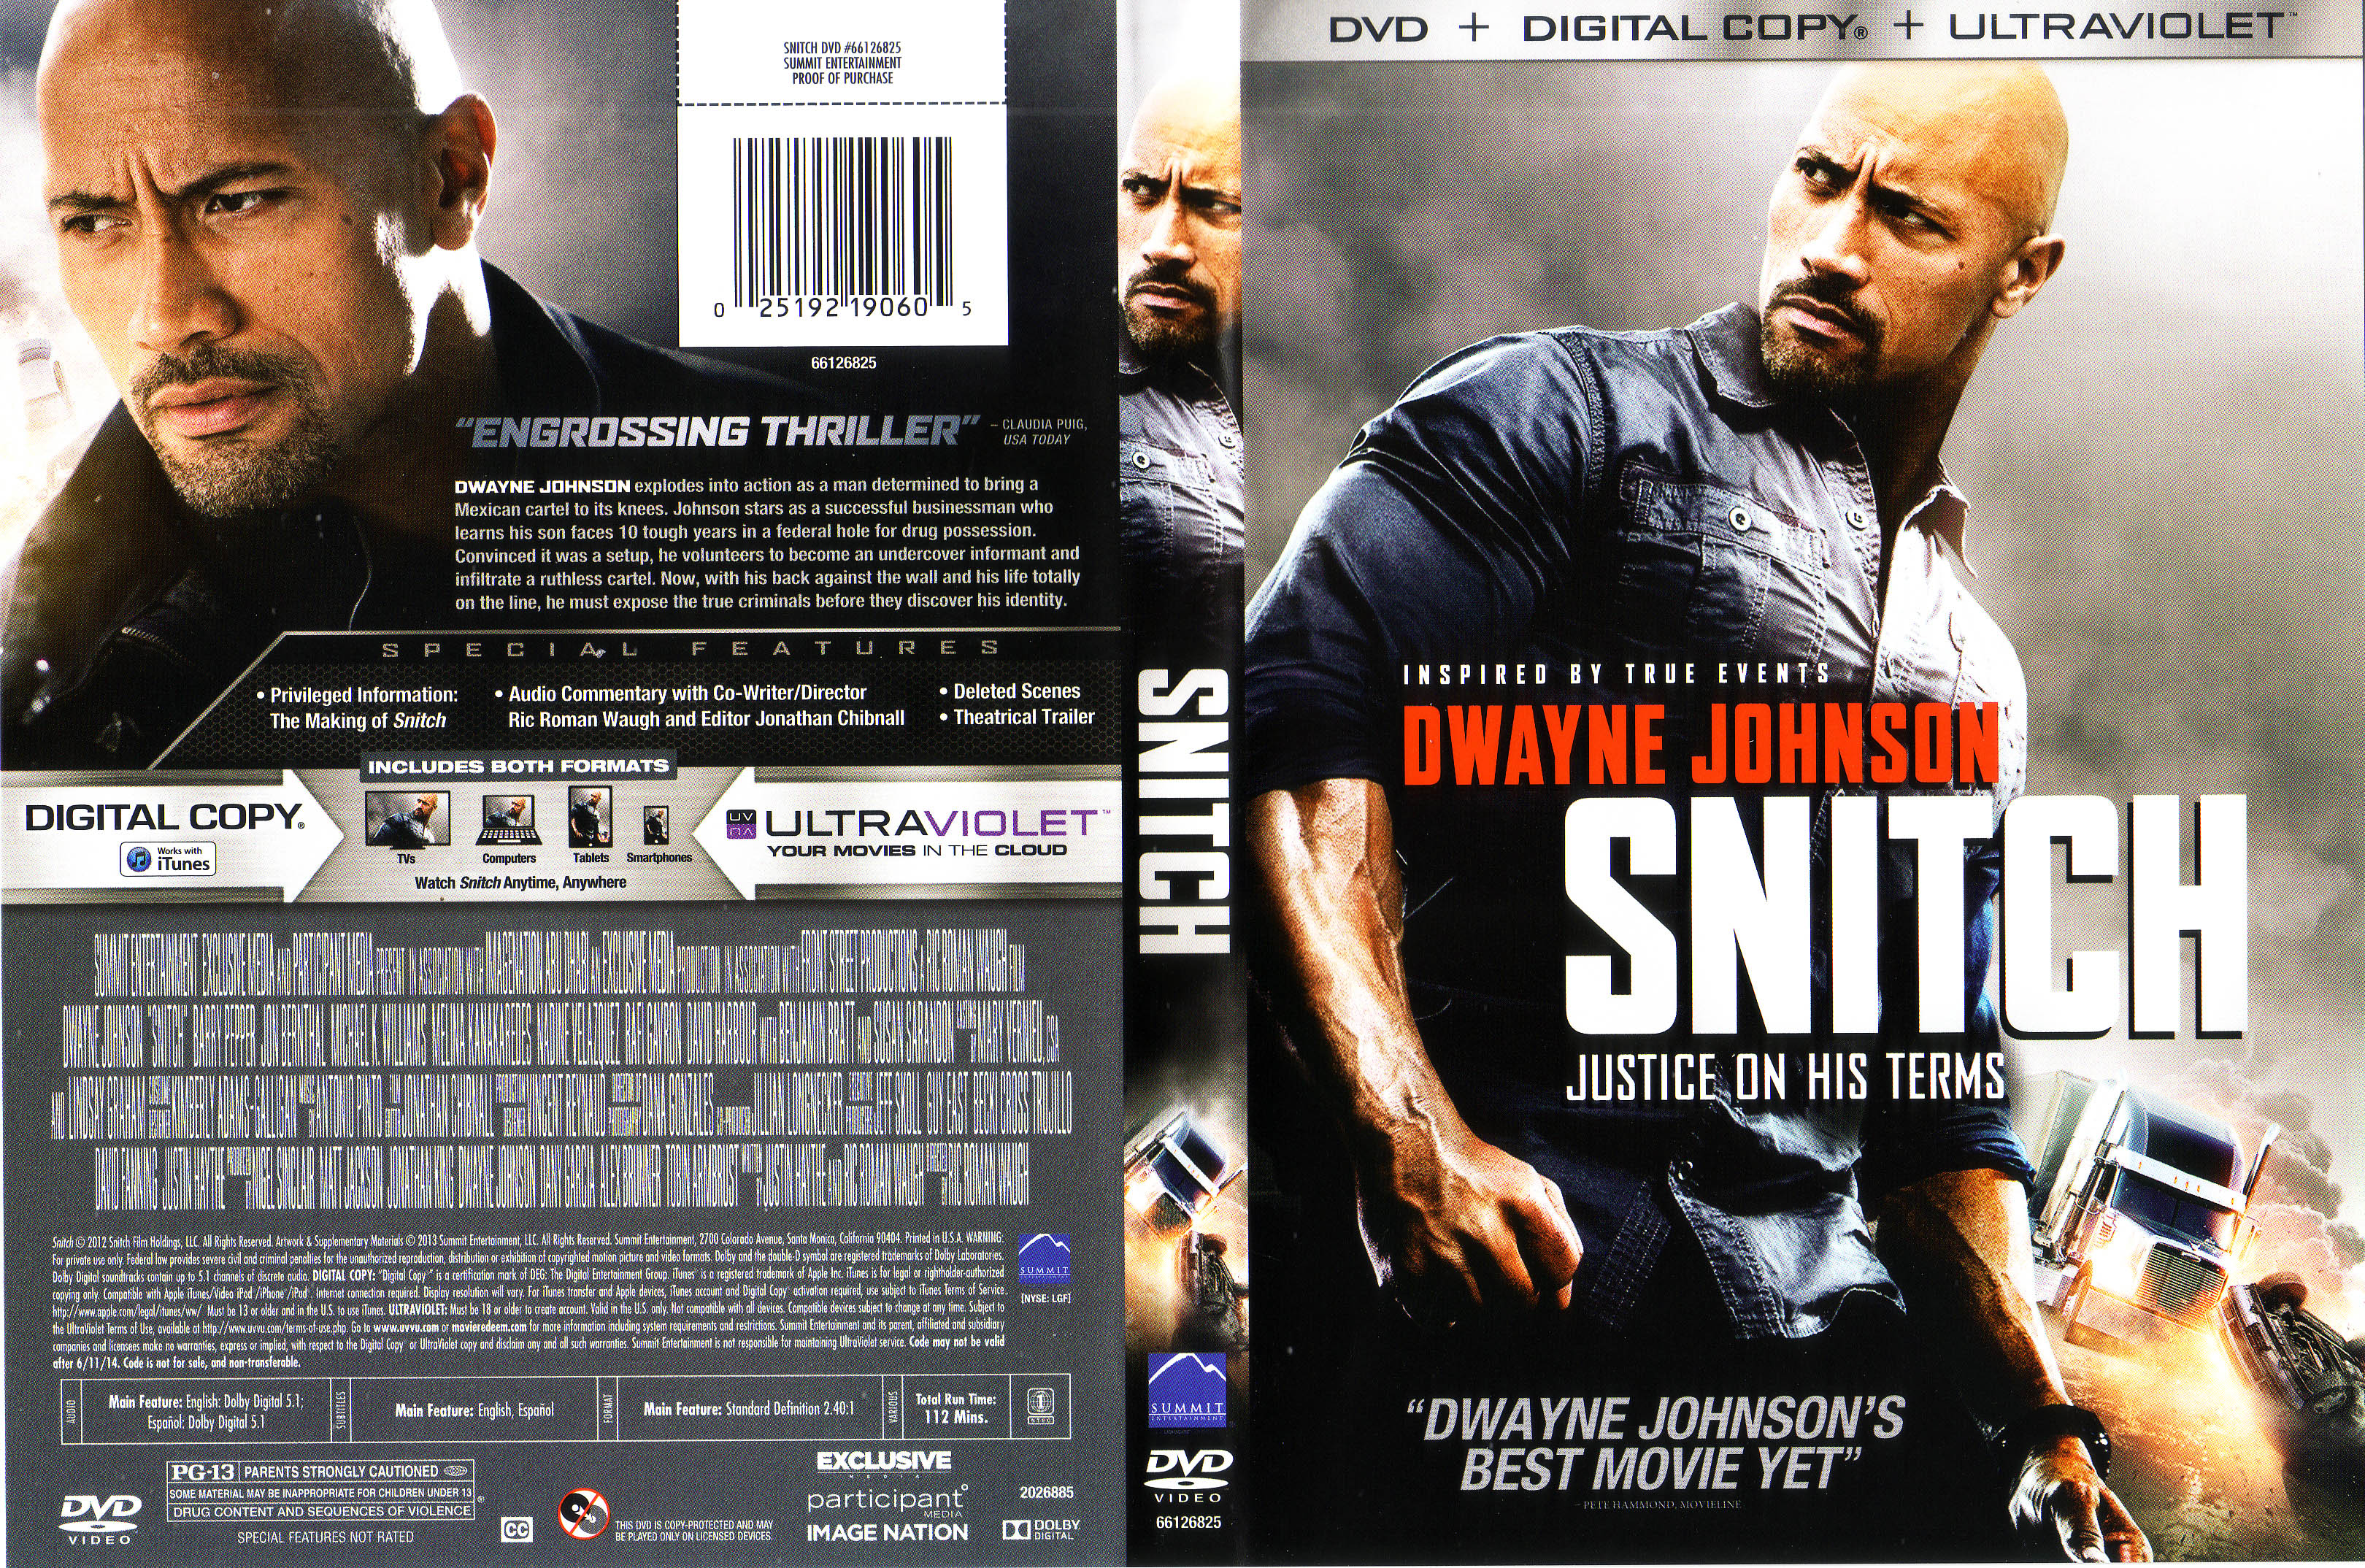 Jaquette DVD Snitch - Infiltr Zone 1